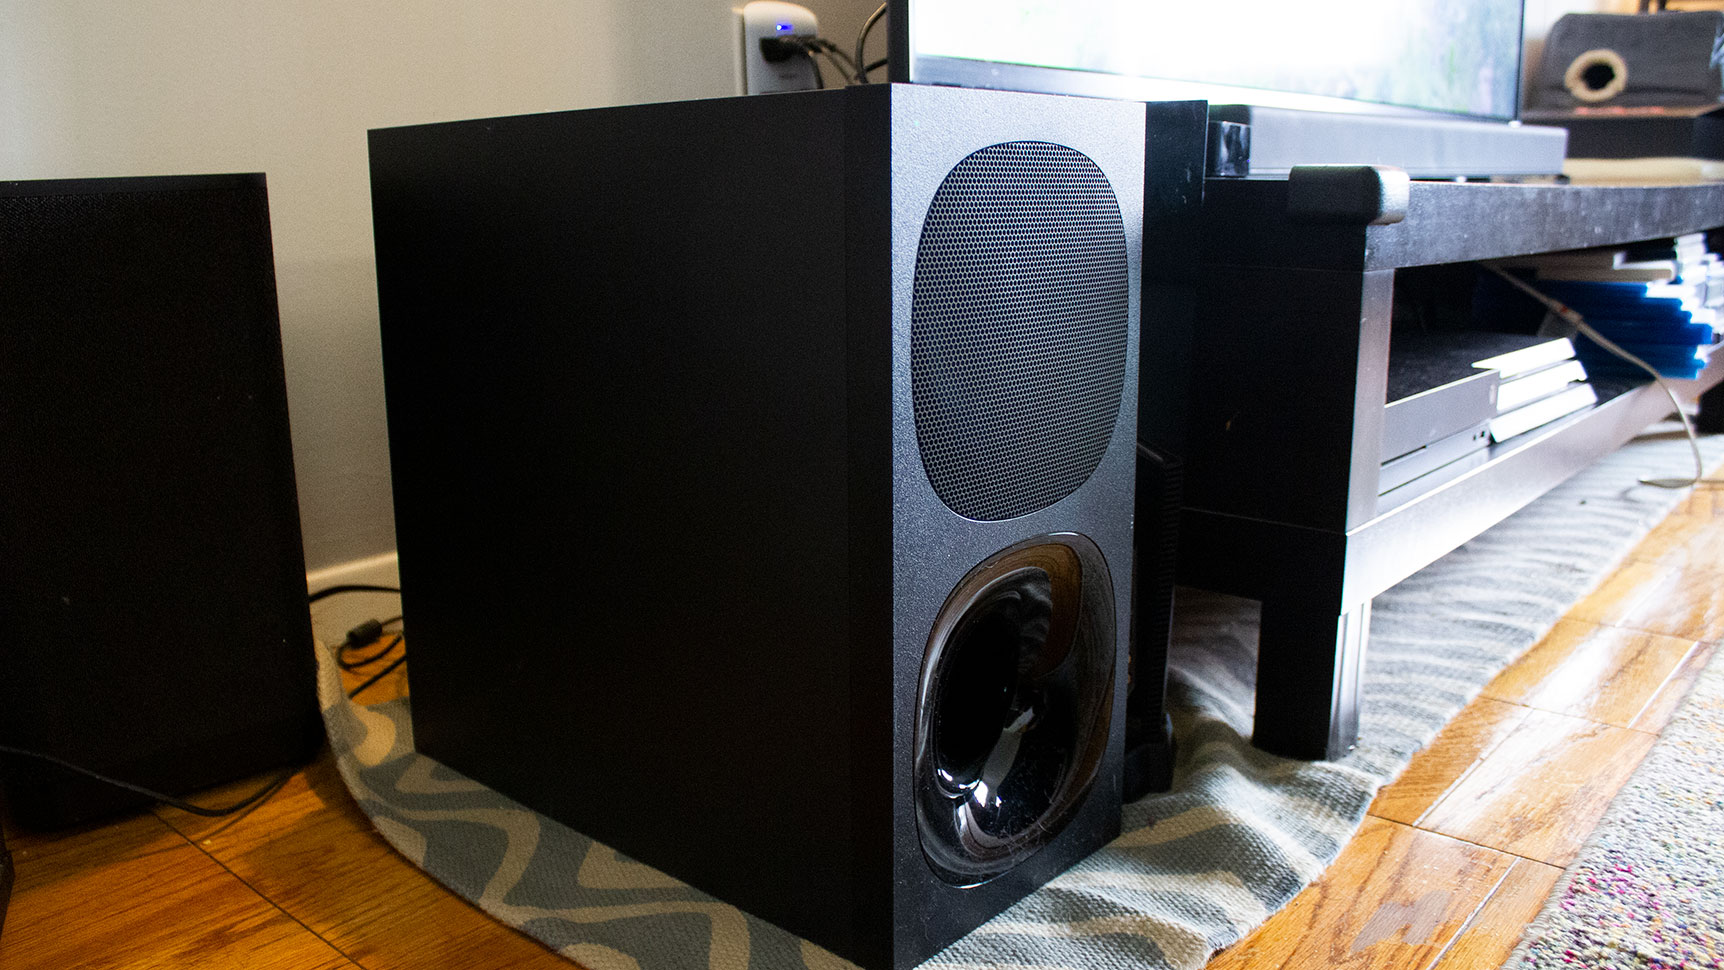 The Sony HT-G700 Makes for Soundbars Dolby Case Atmos a Great Budget